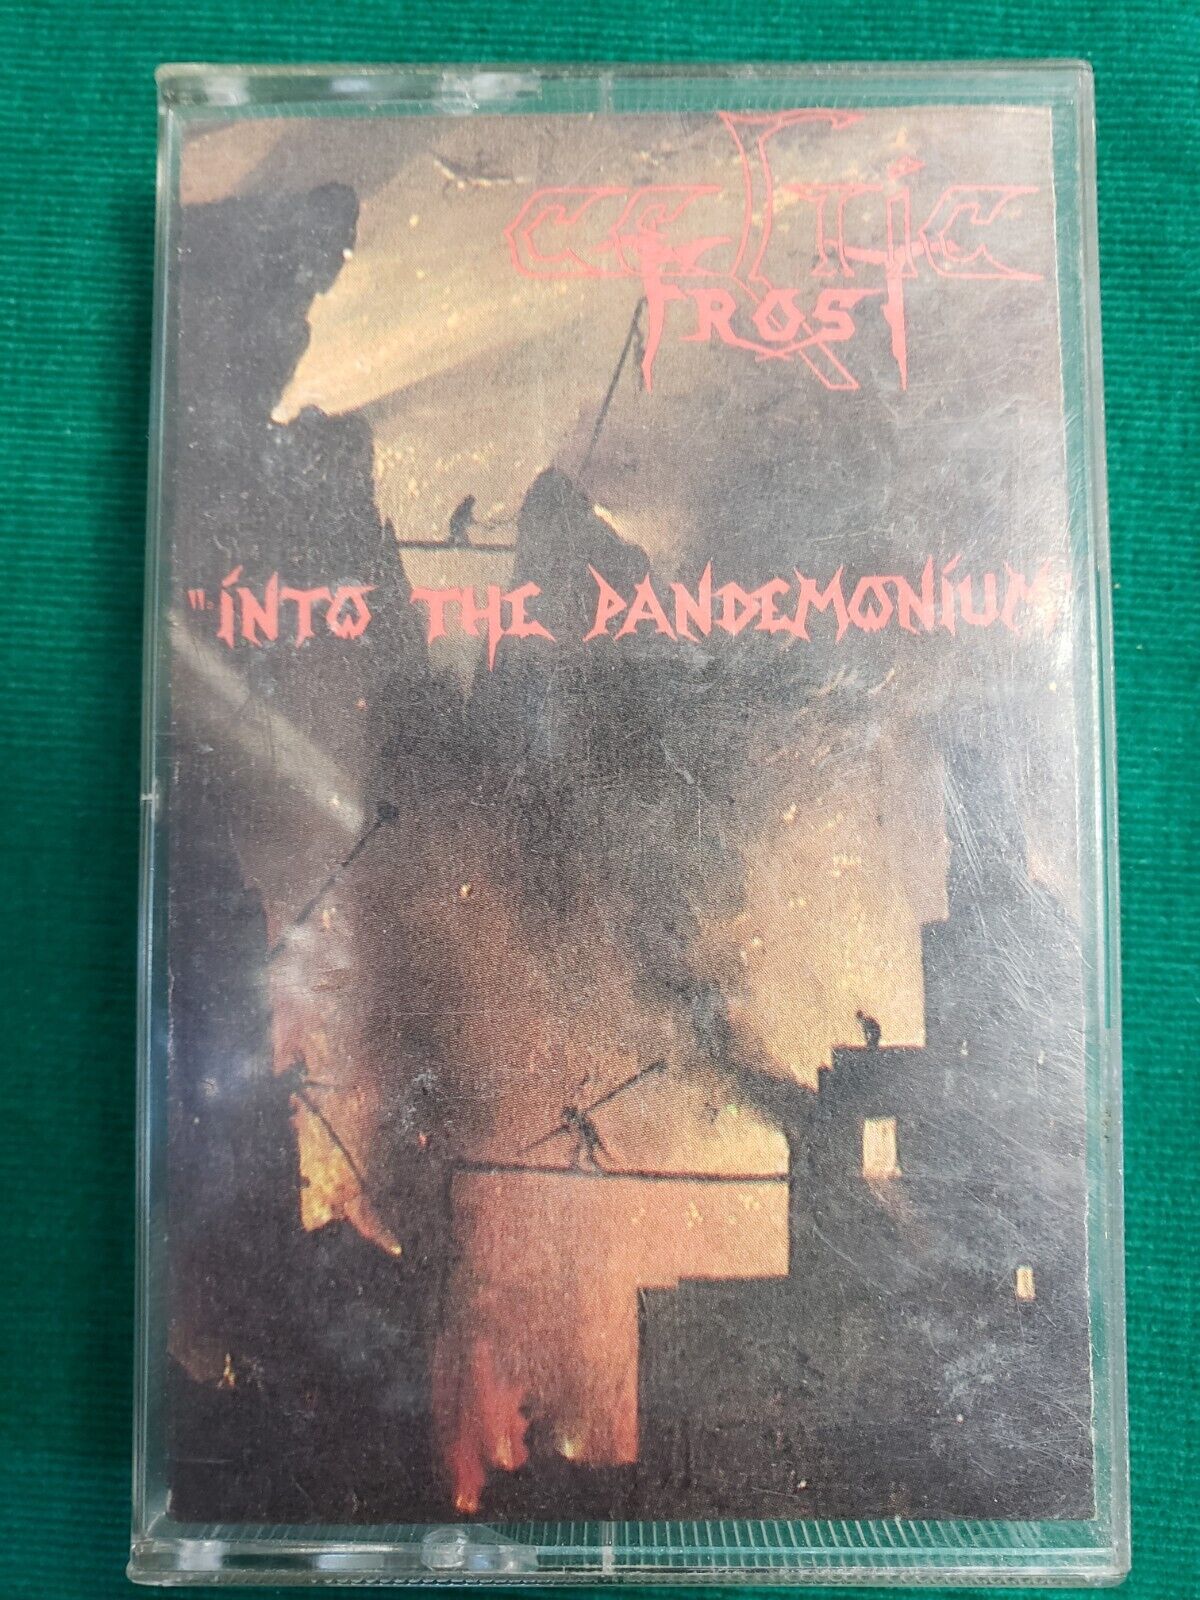 Celtic Frost - Into The Pandemonium Cassette Tape 1987 Noise Combat Fully Tested